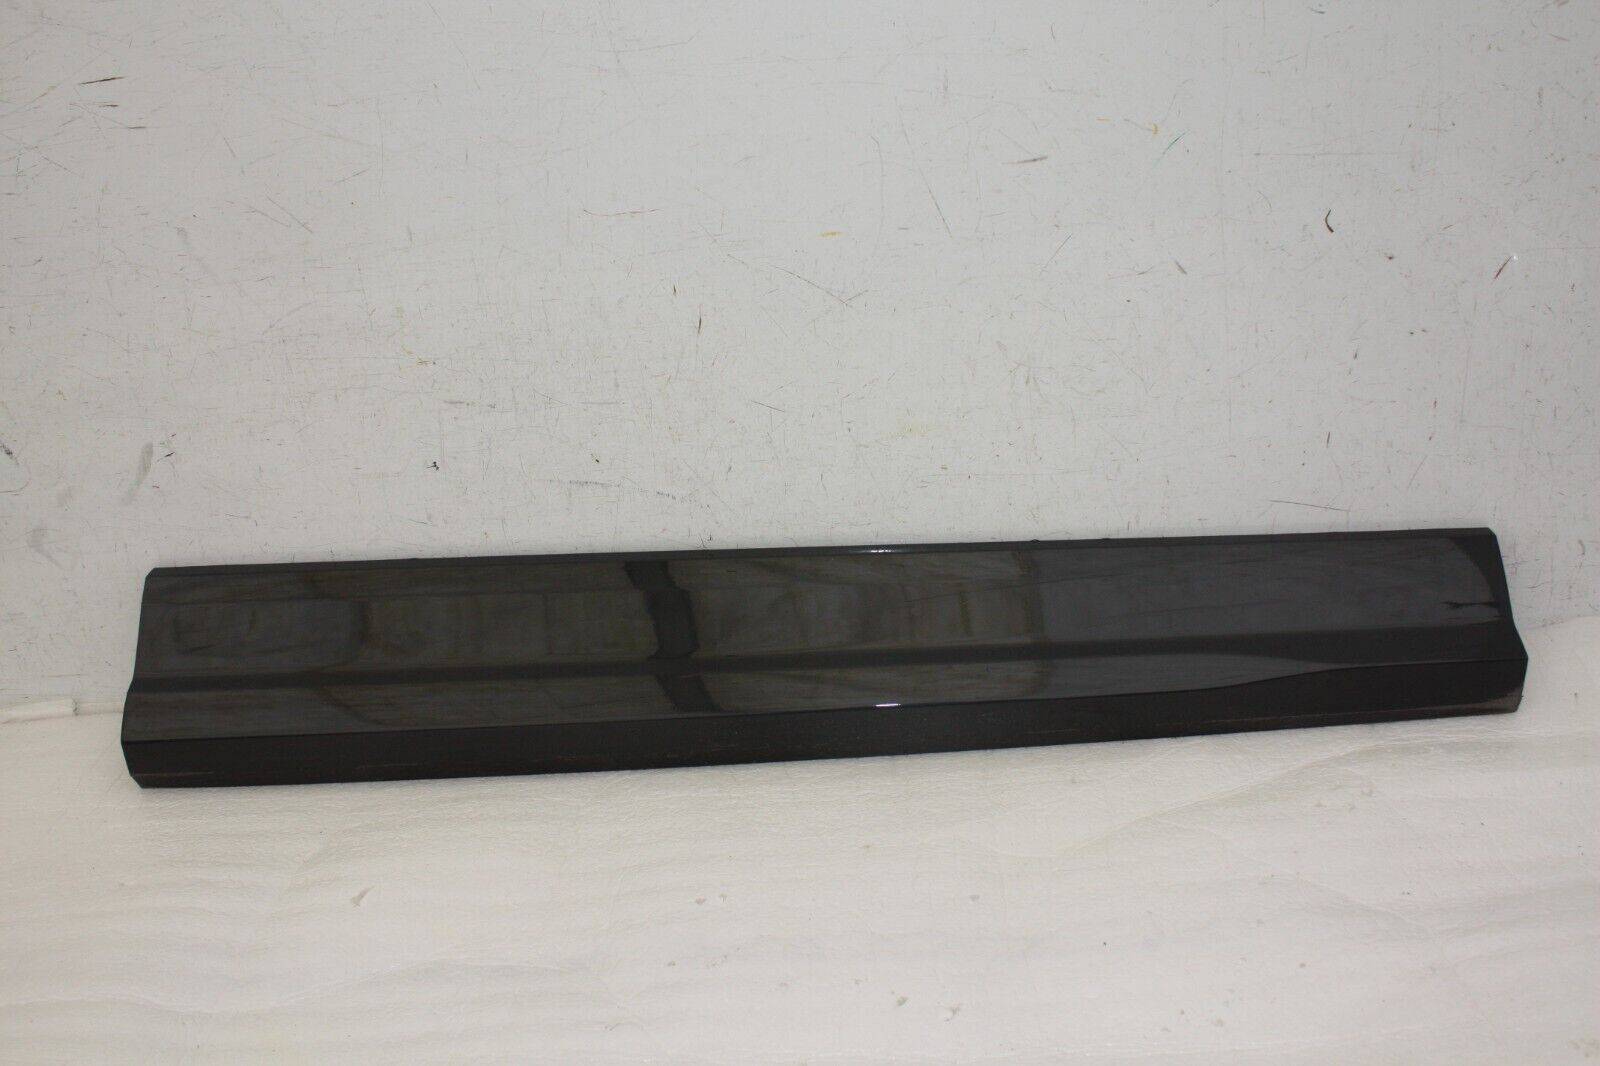 Audi Q2 Front Right Side Door Moulding 2016 TO 2021 81A853960B Genuine 176385412605